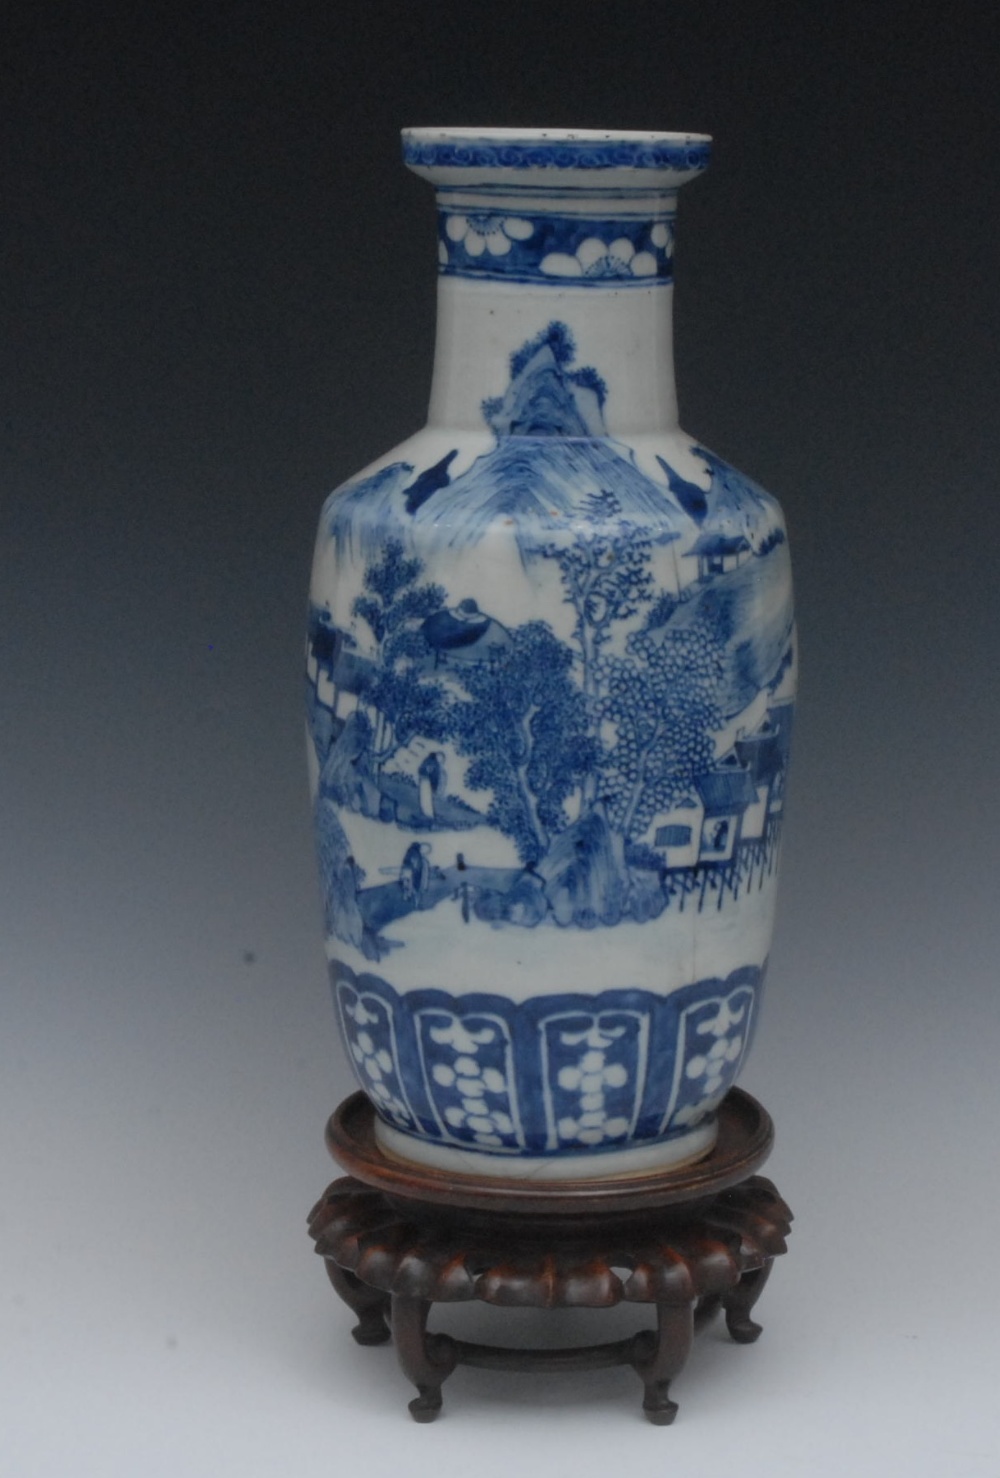 A Chinese blue and white rouleau vase, decorated with a continuous scene of figures, huts, pine tree